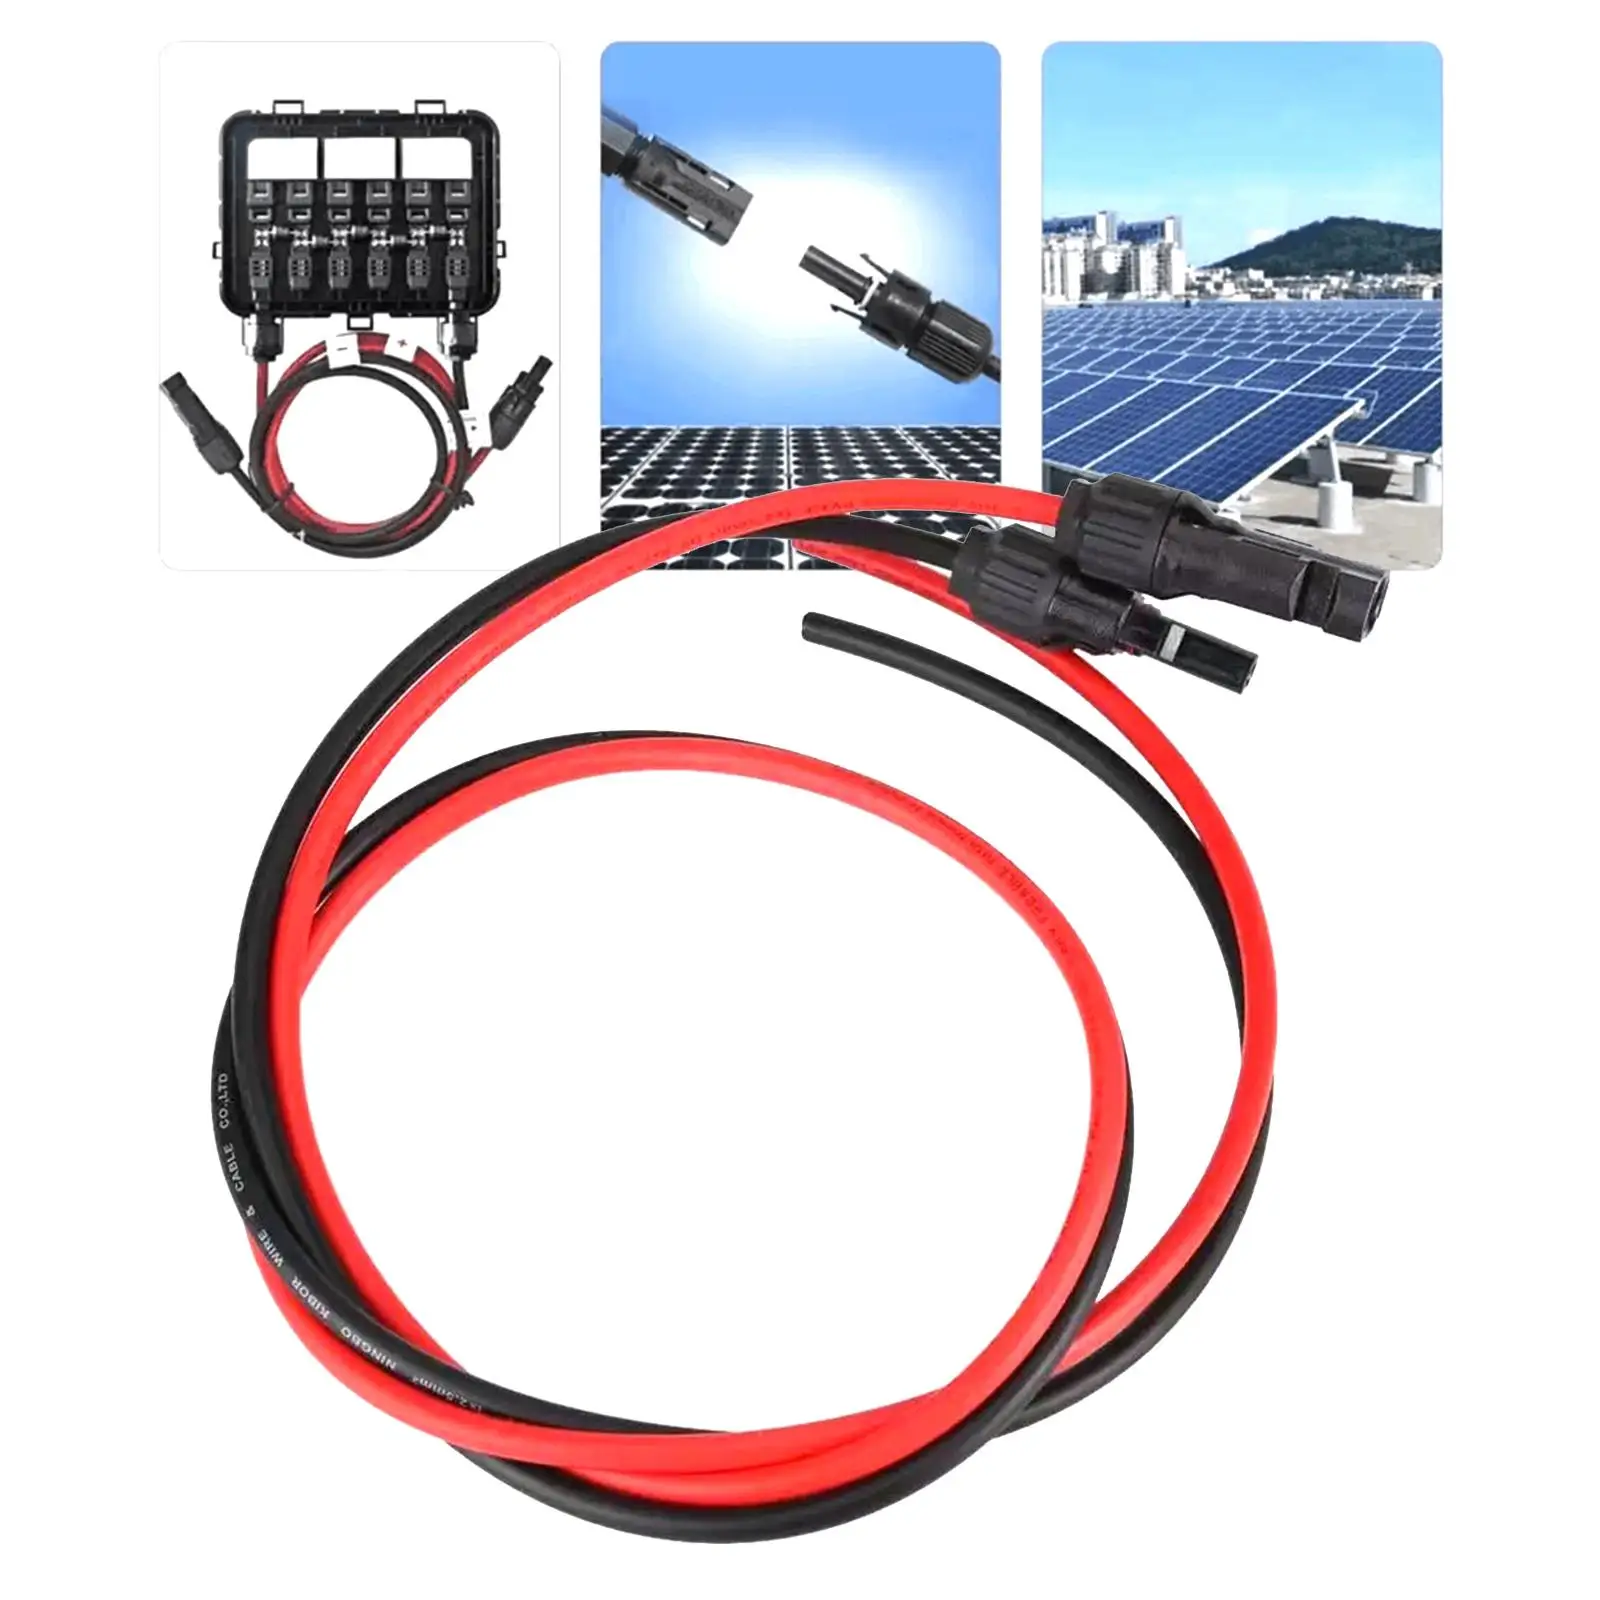 Solar Wire Extension PV Wire Harness Cords Black Red Connecting Connector Cable for Solar Panels Car Backpacking Traveling